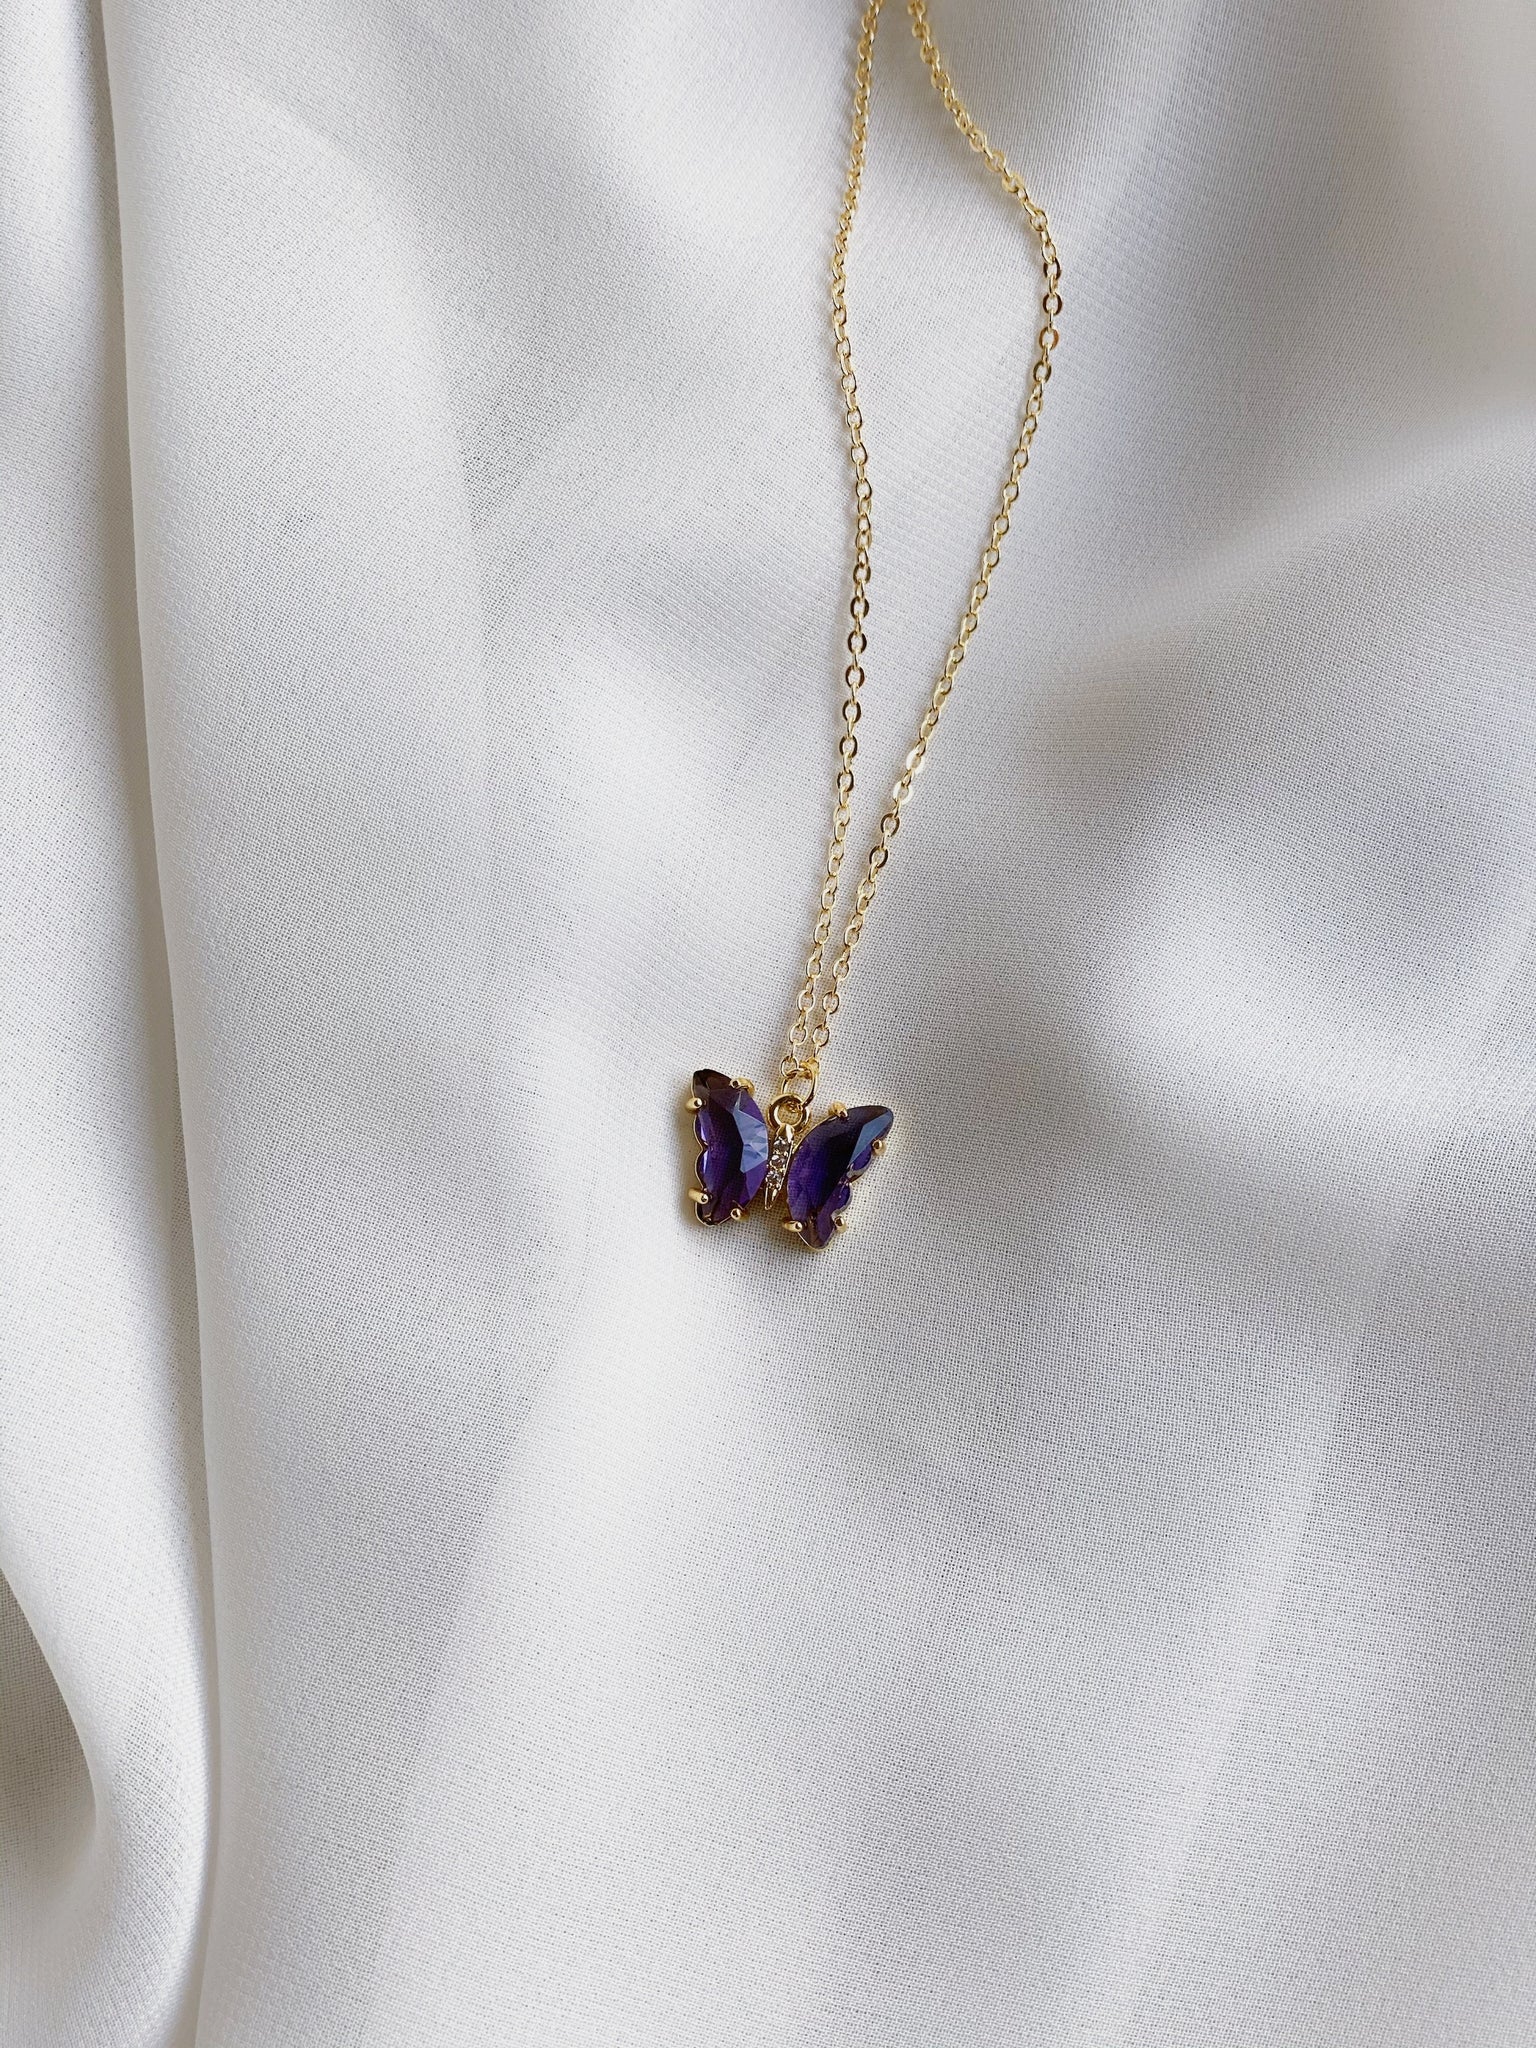 Glass Mariposa Butterfly Necklace